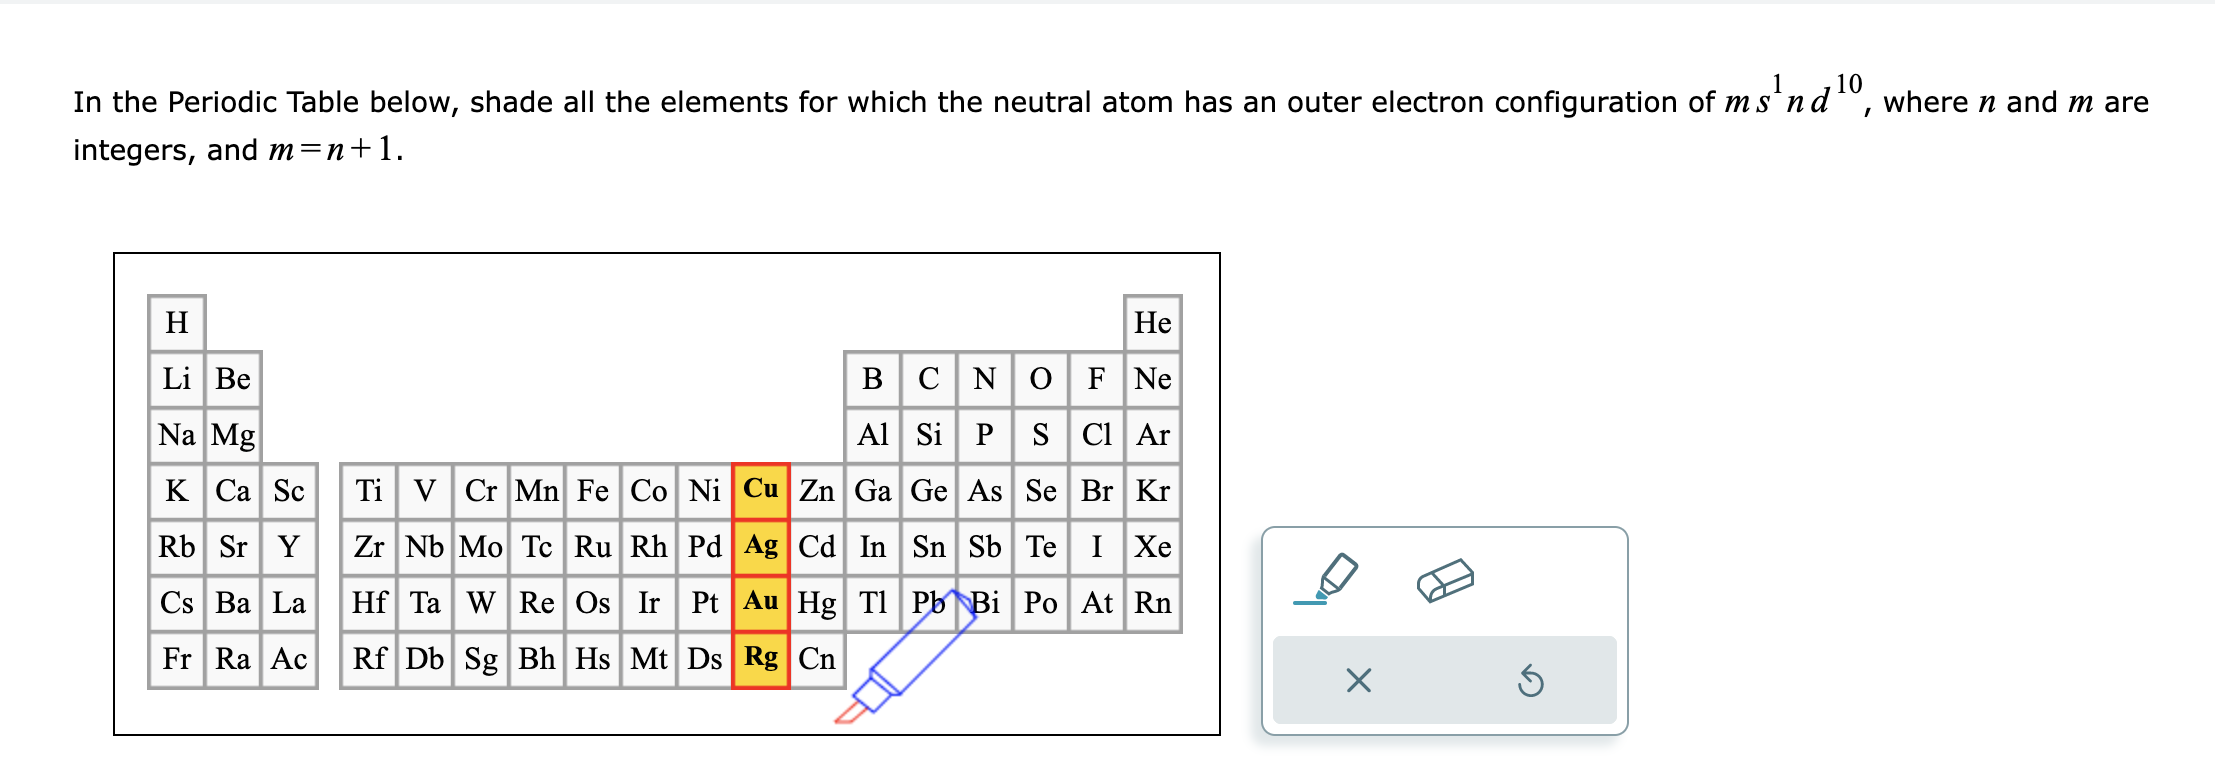 In the Periodic Table below, shade all the elements for which the neutral atom has an outer electron configuration of \( m s 